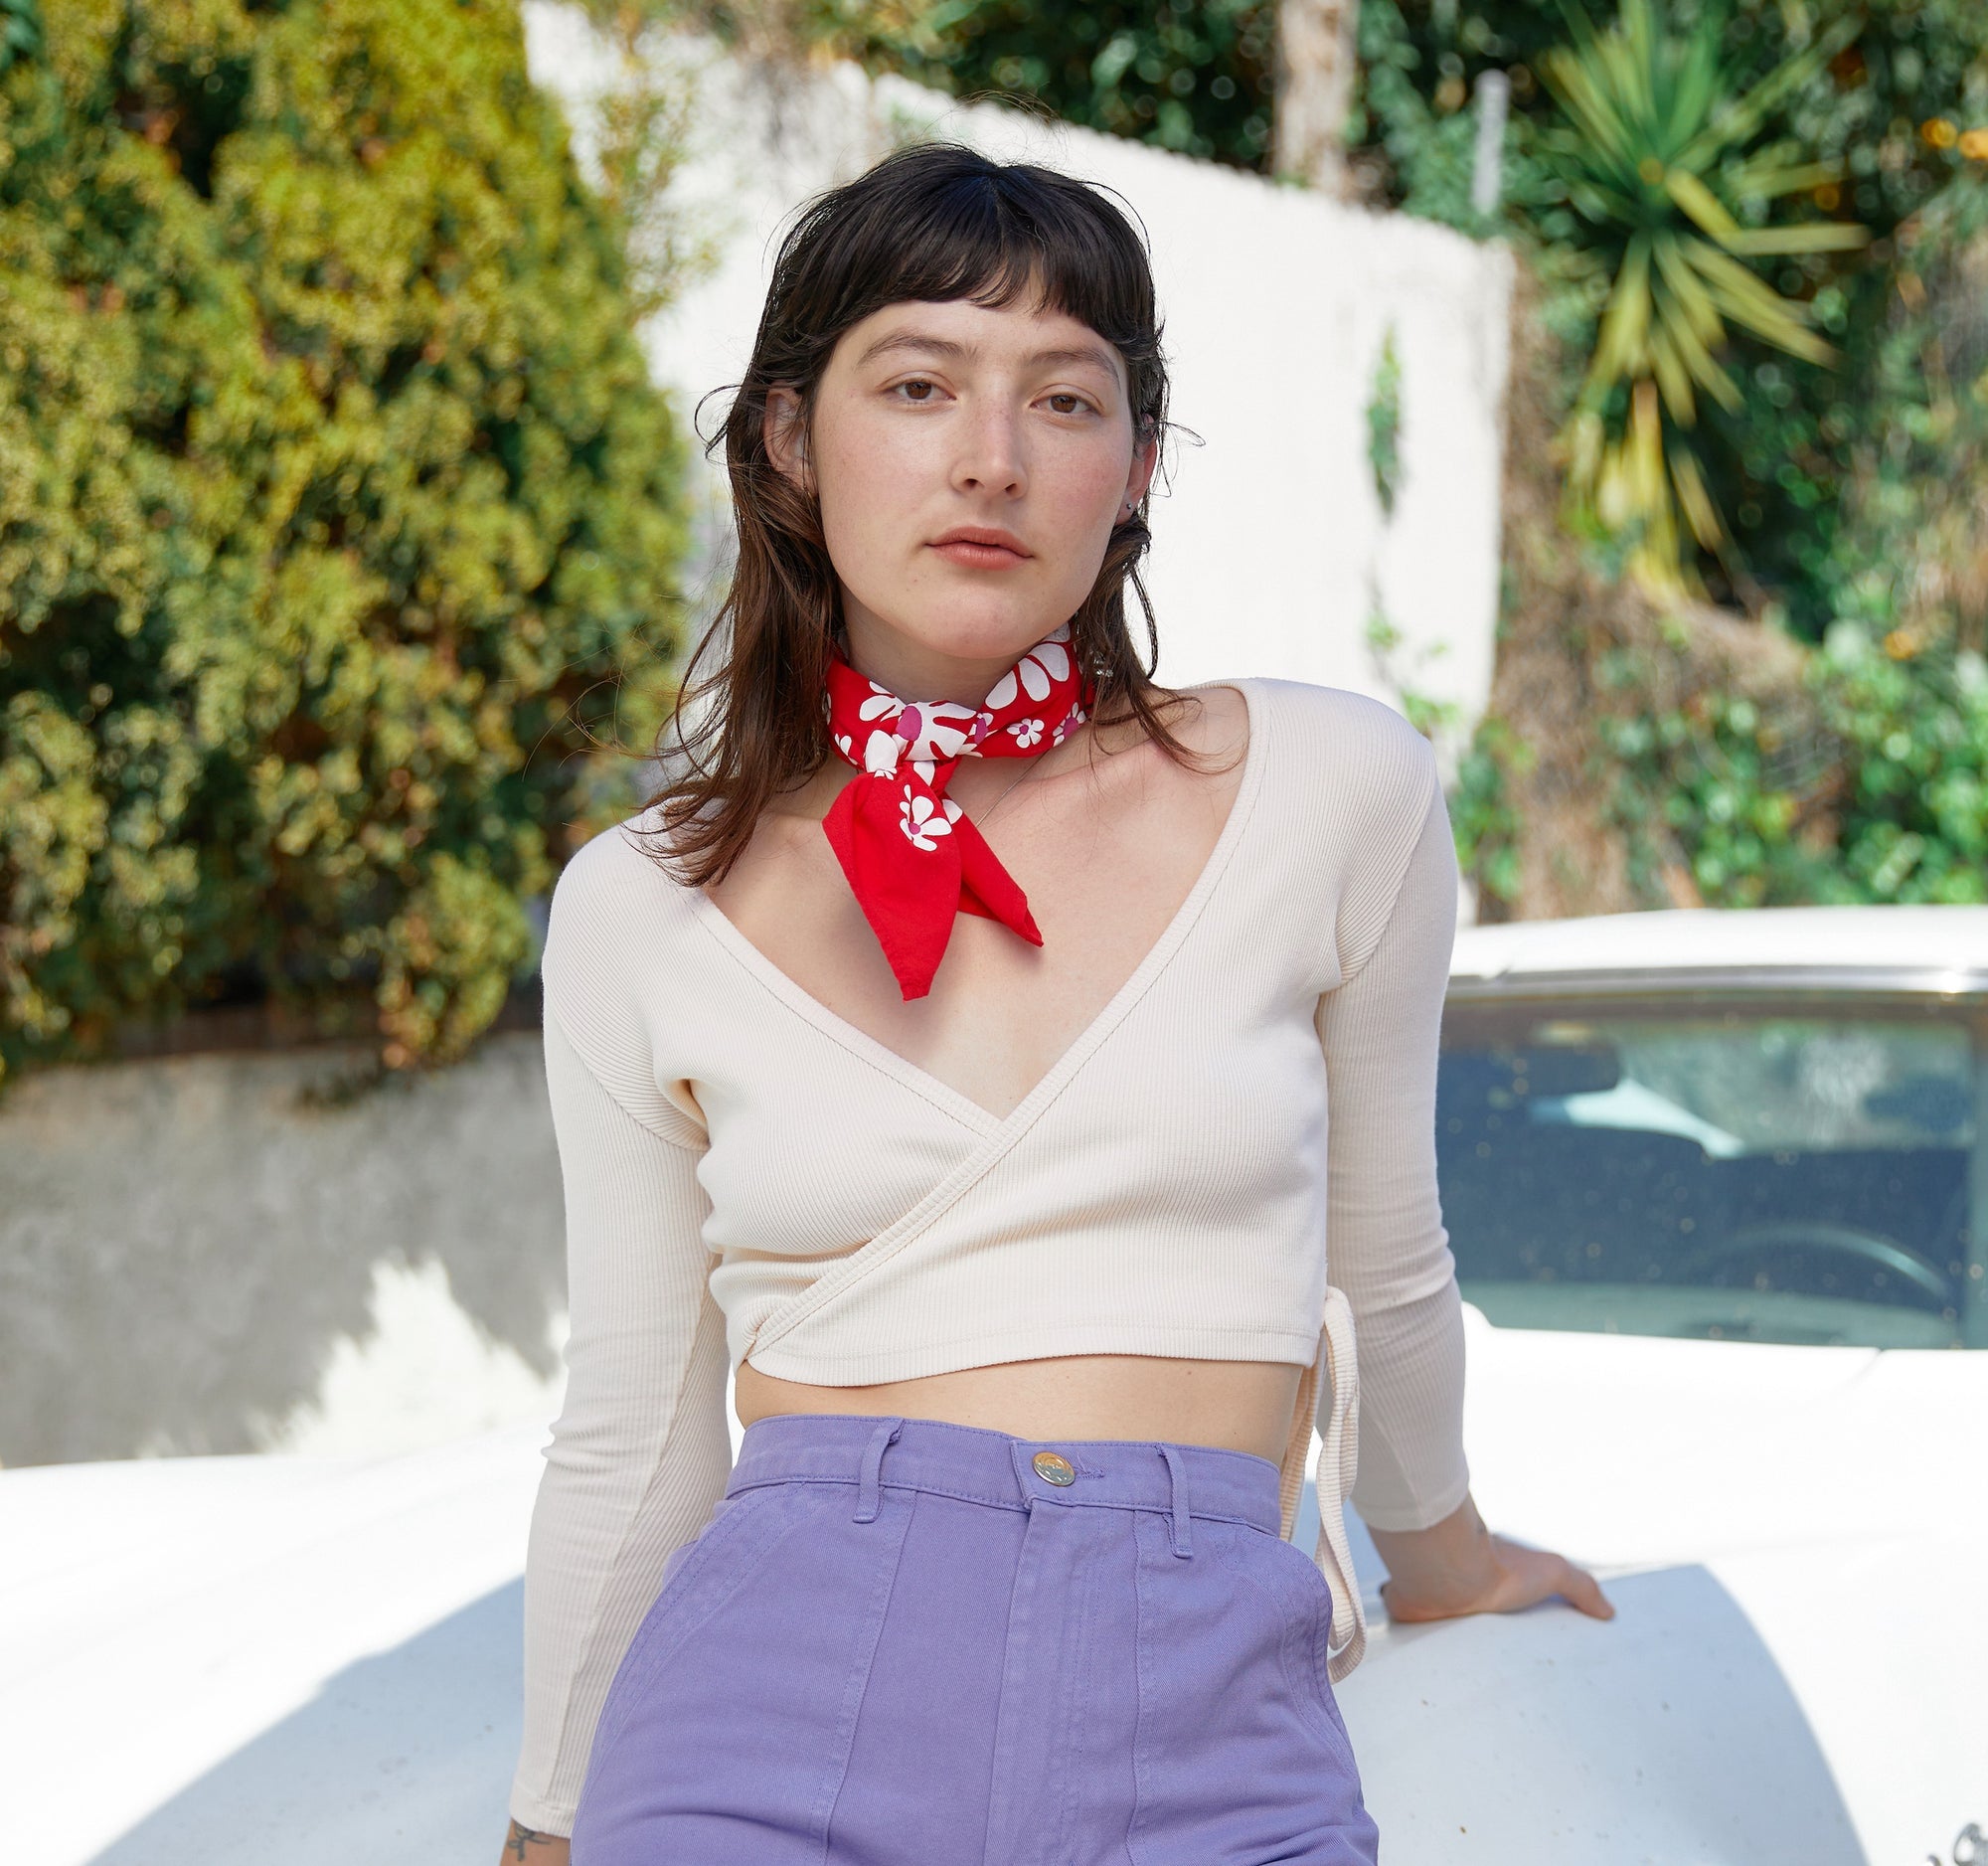 Alexandra Skye wearing Wrap Top in Vintage Off-White, Work Shorts in Faded Grape and Lazy Daisy Bandana in Mustang Red